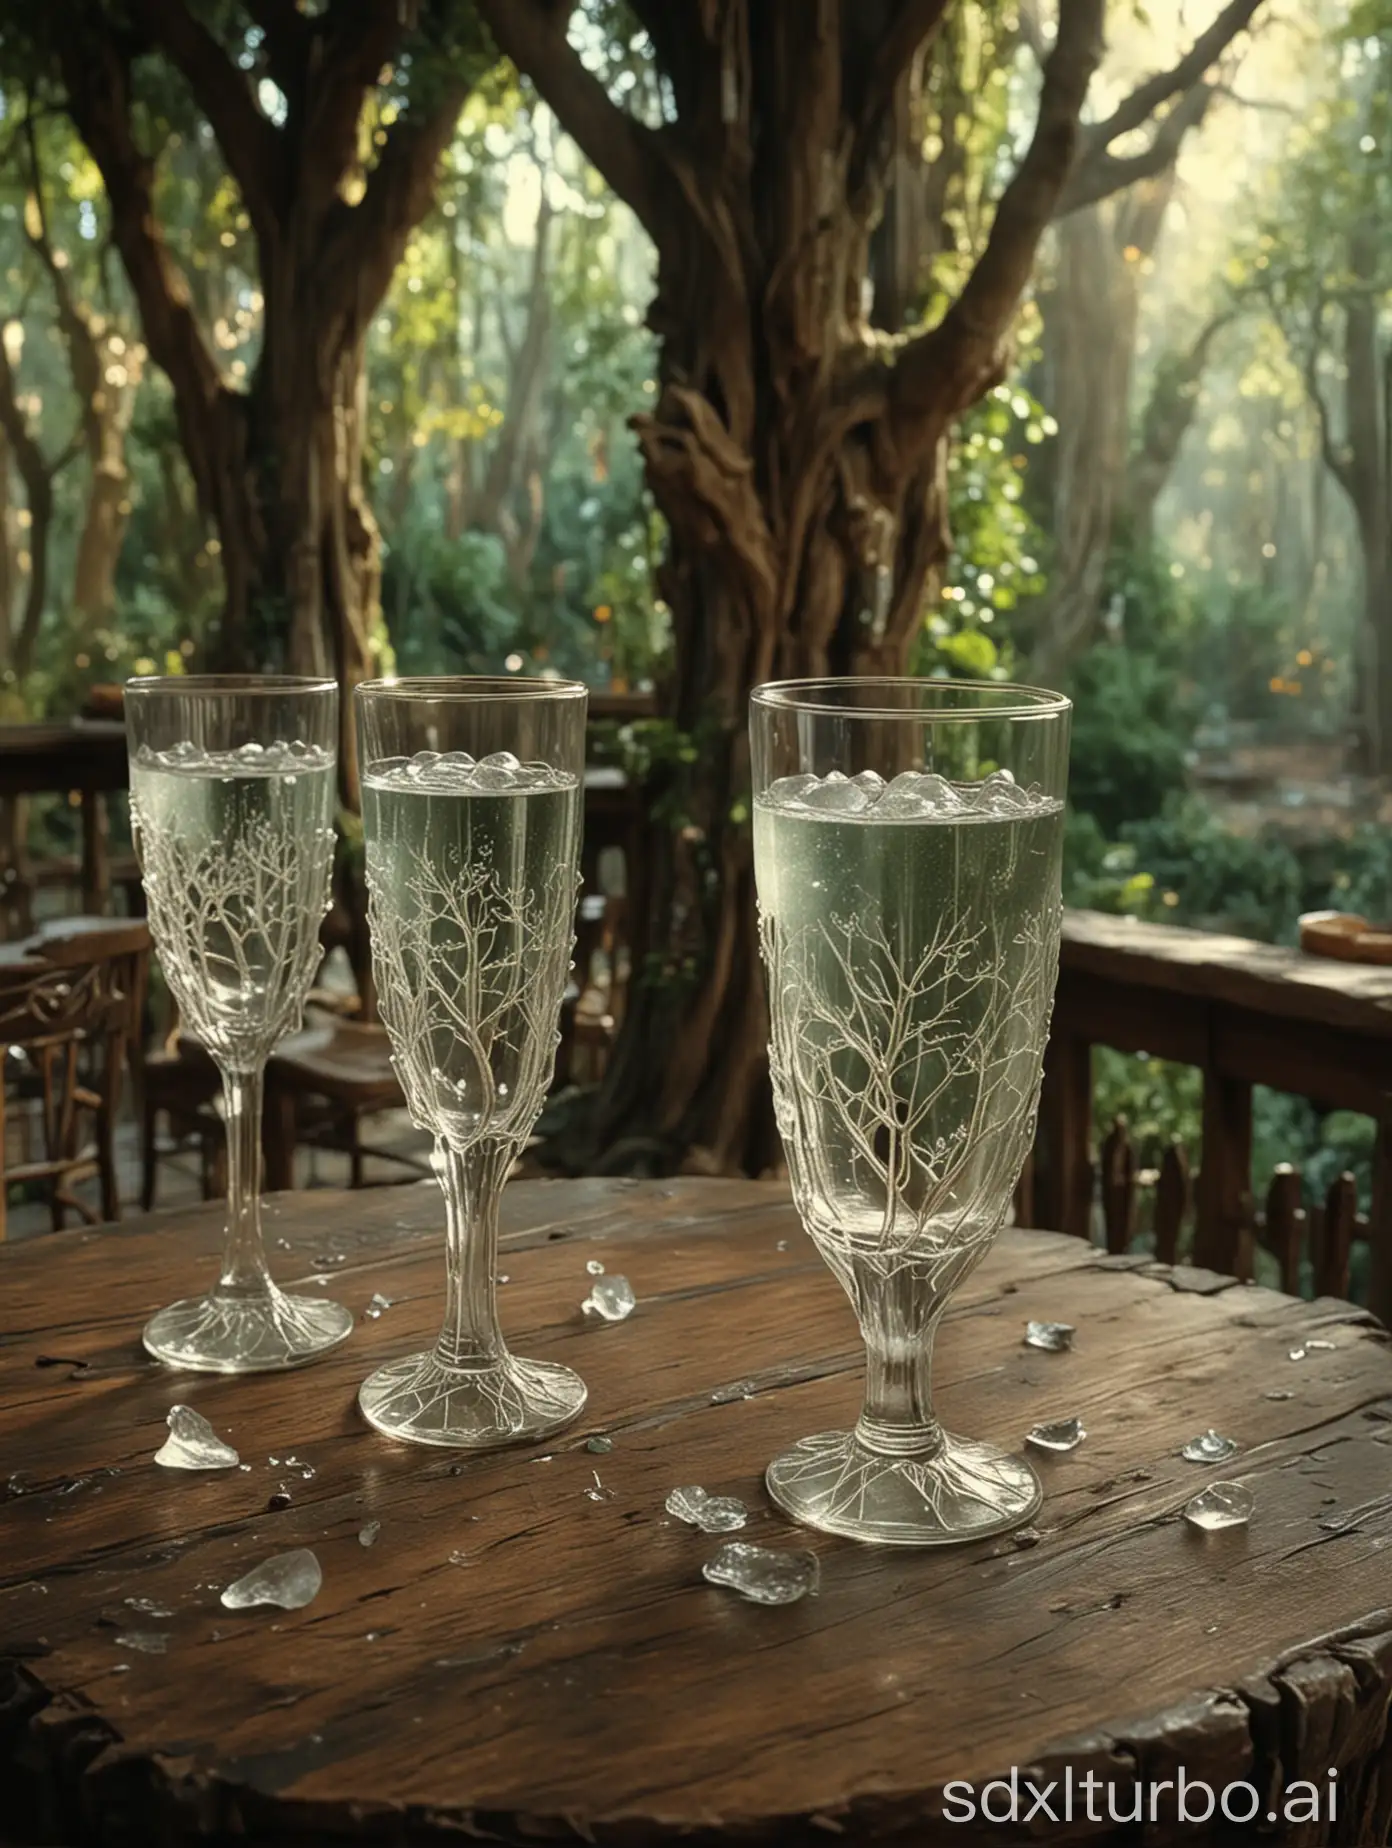 screenshot from the fantasy film "The Lord of the Rings" 2001, close-up, soft focus, table in an elven tree house in Lothlorien, exquisite glass glasses with cold drinks with ice, dreamy effect, magic